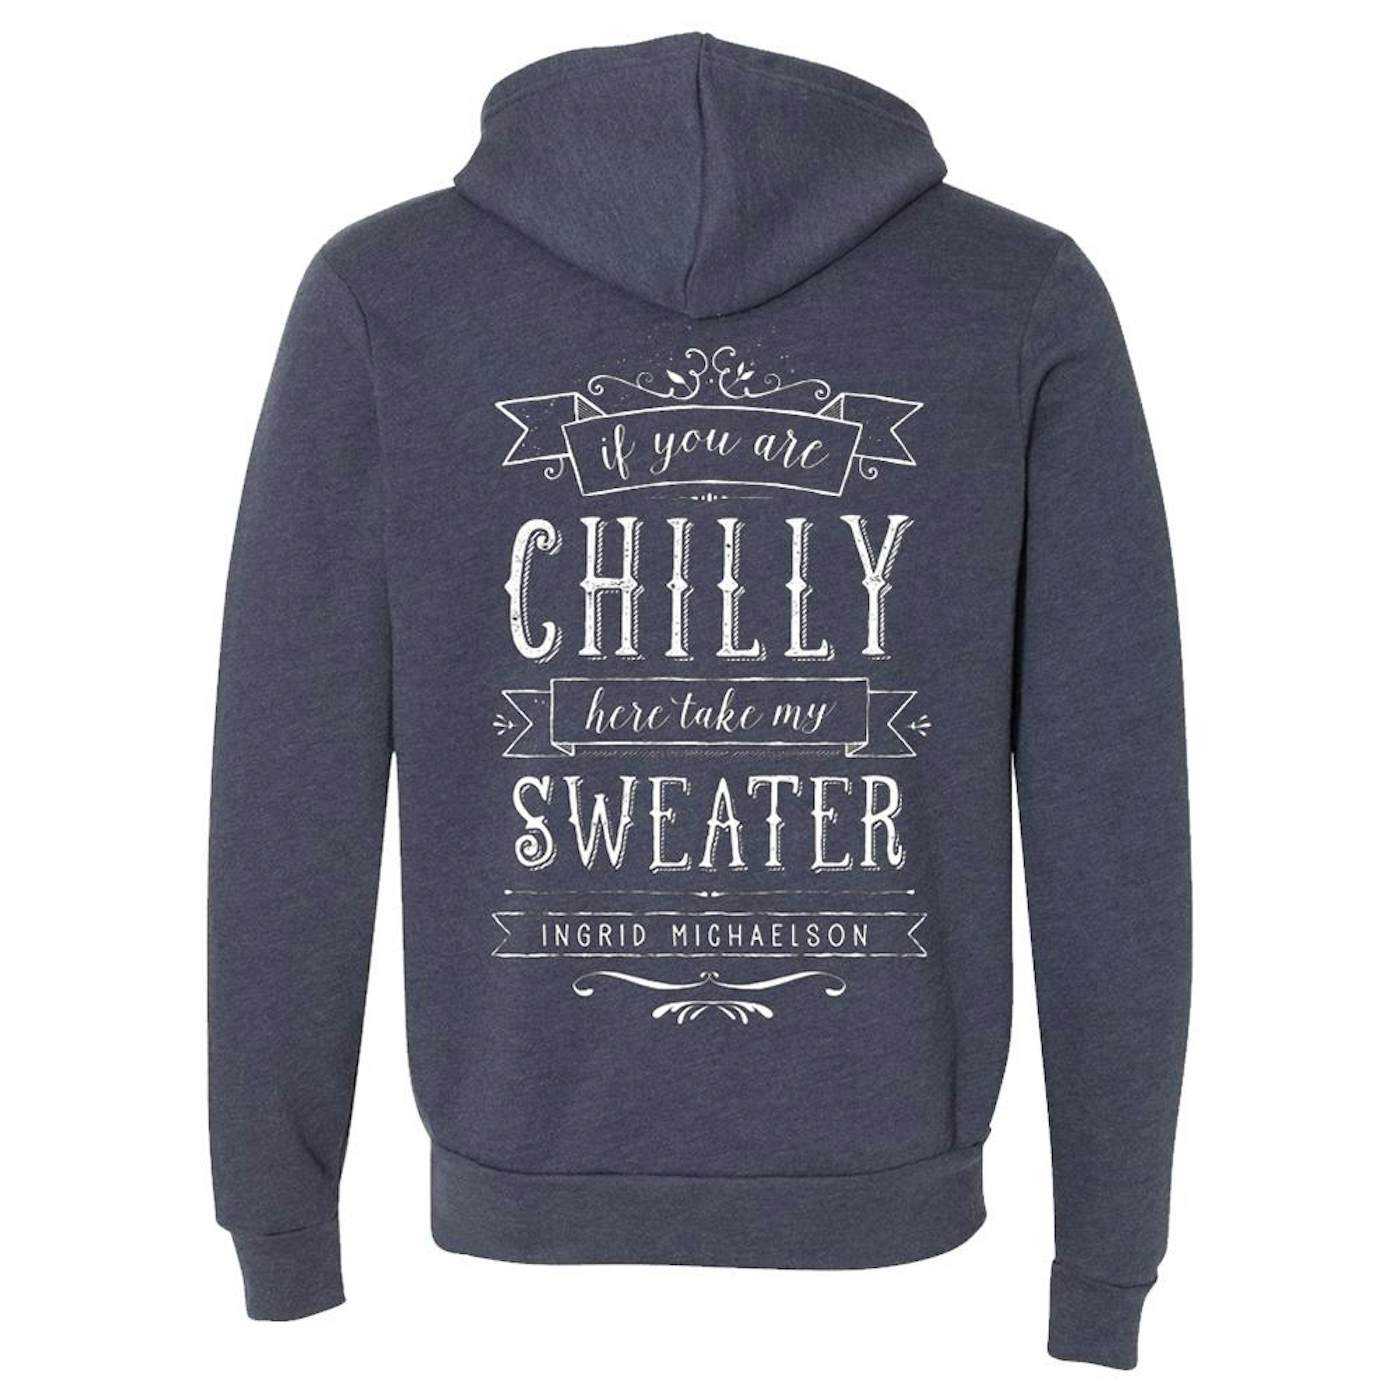 Ingrid Michaelson Chilly Zip Hoodie